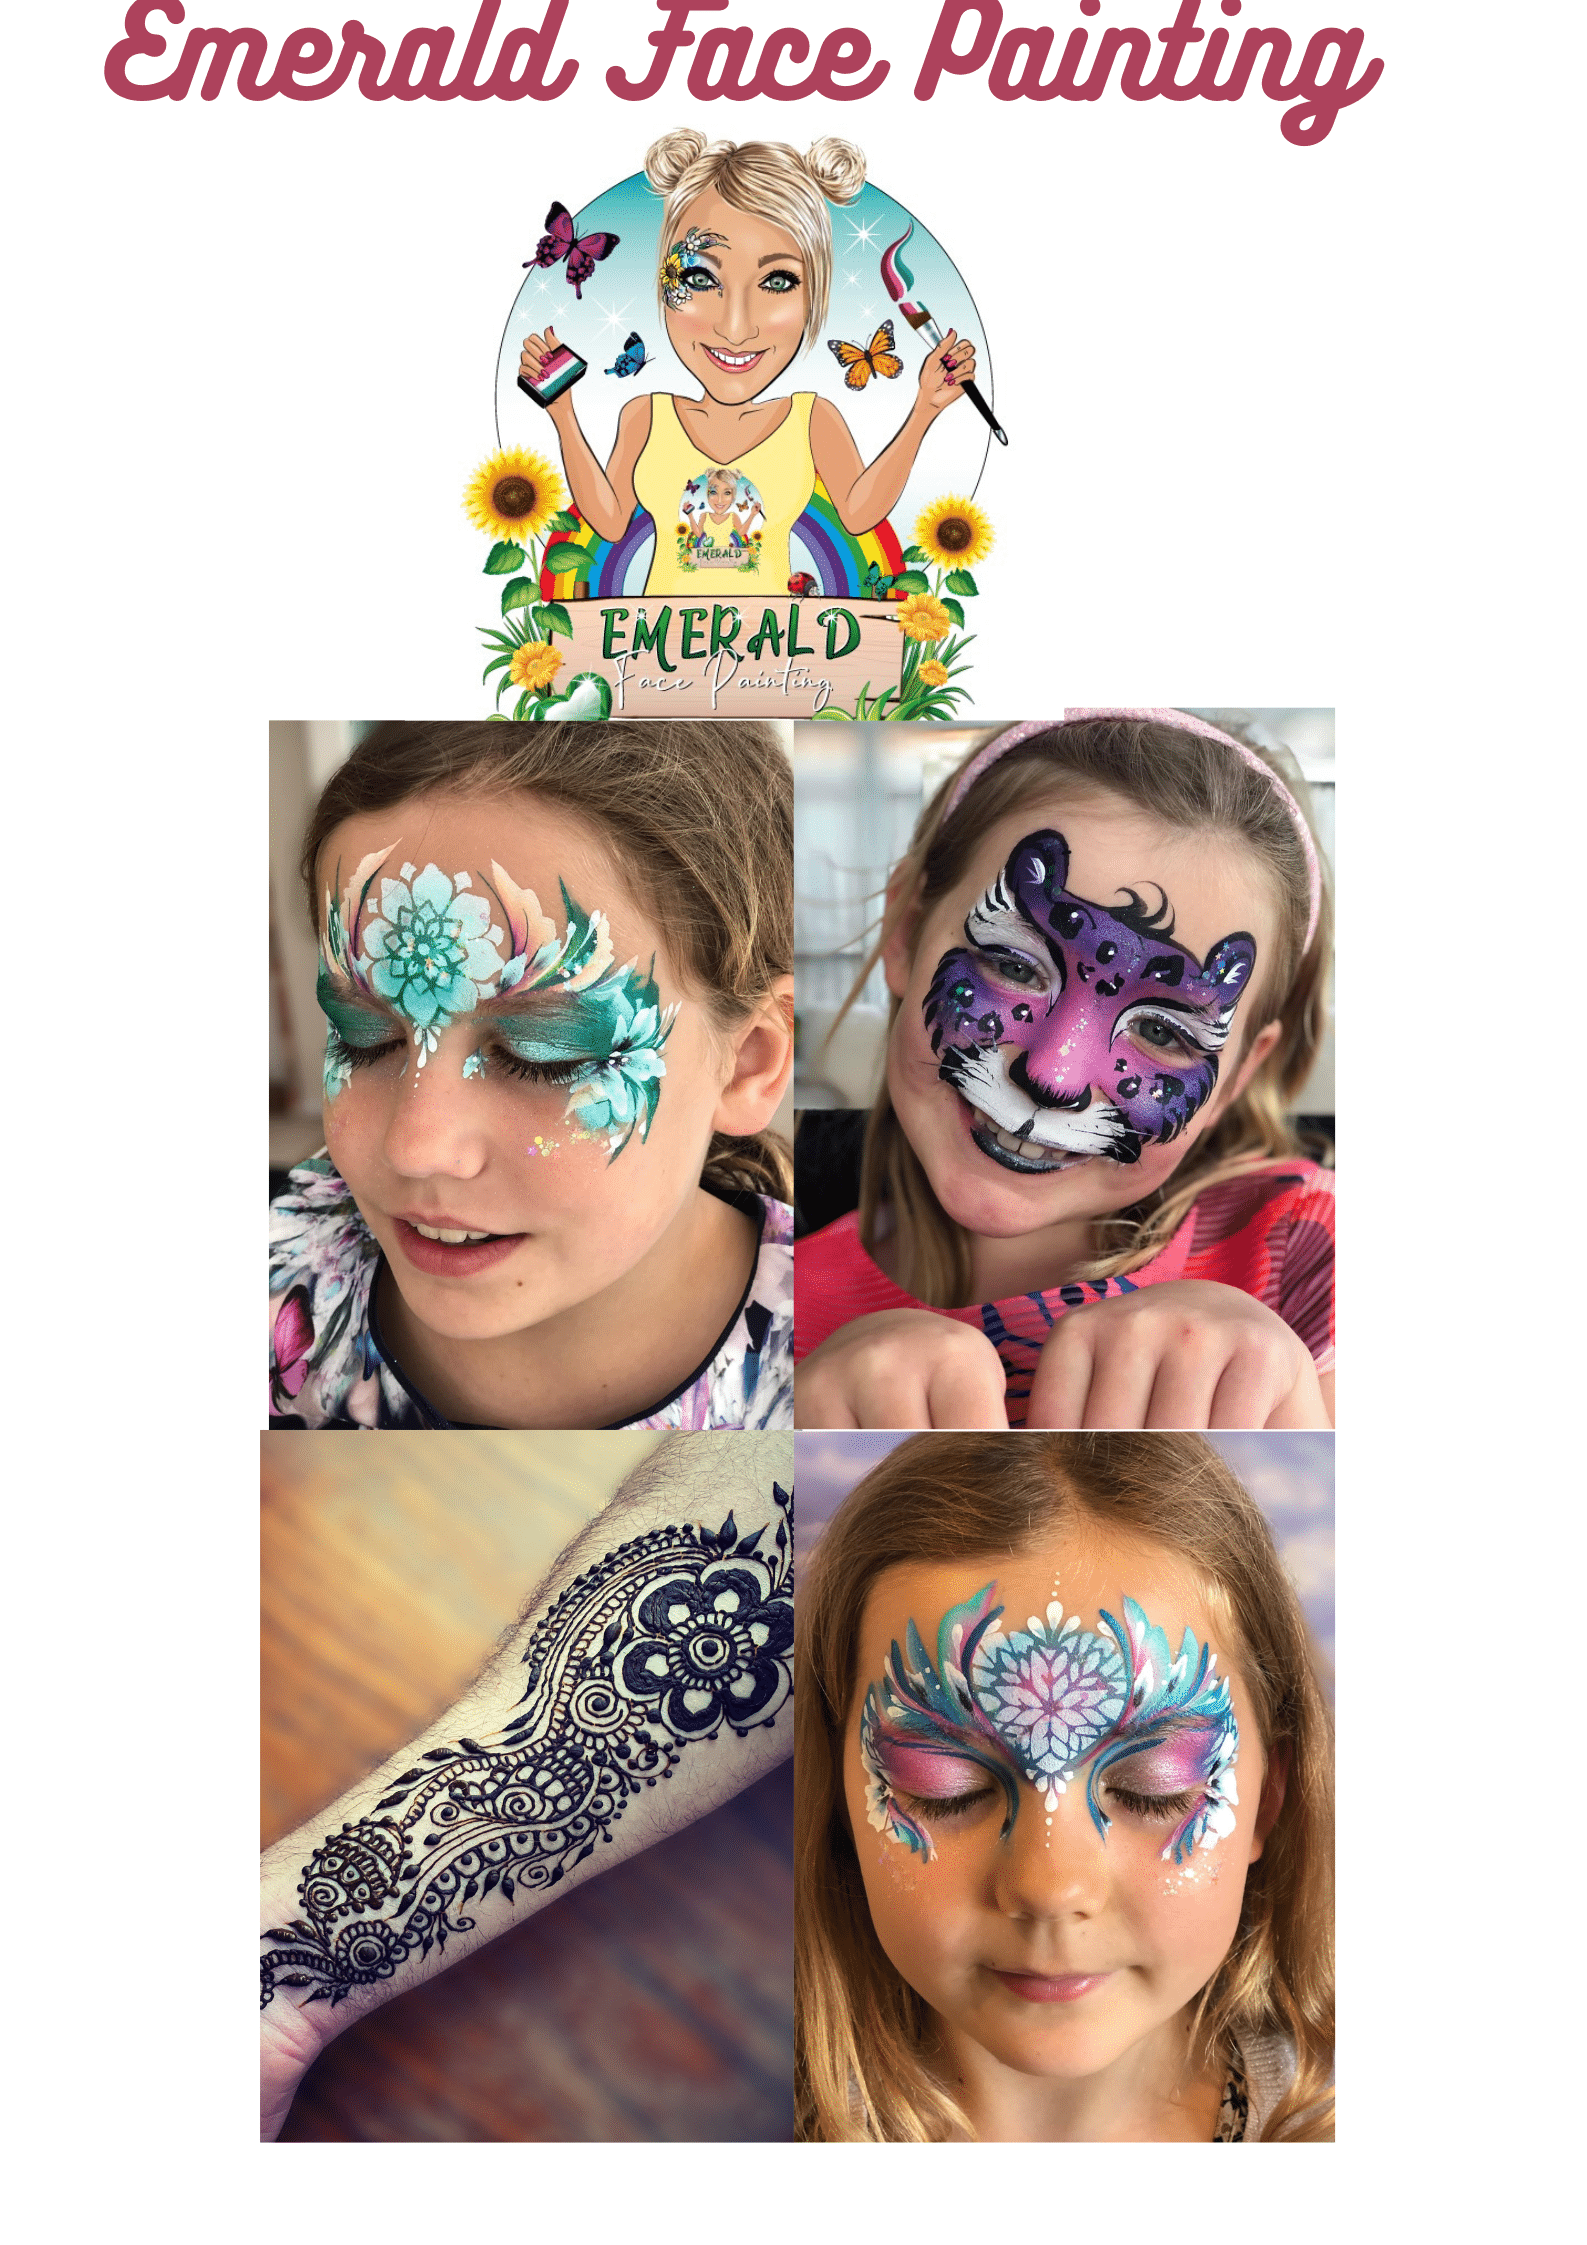 Emerald-Face-Painting-2-1